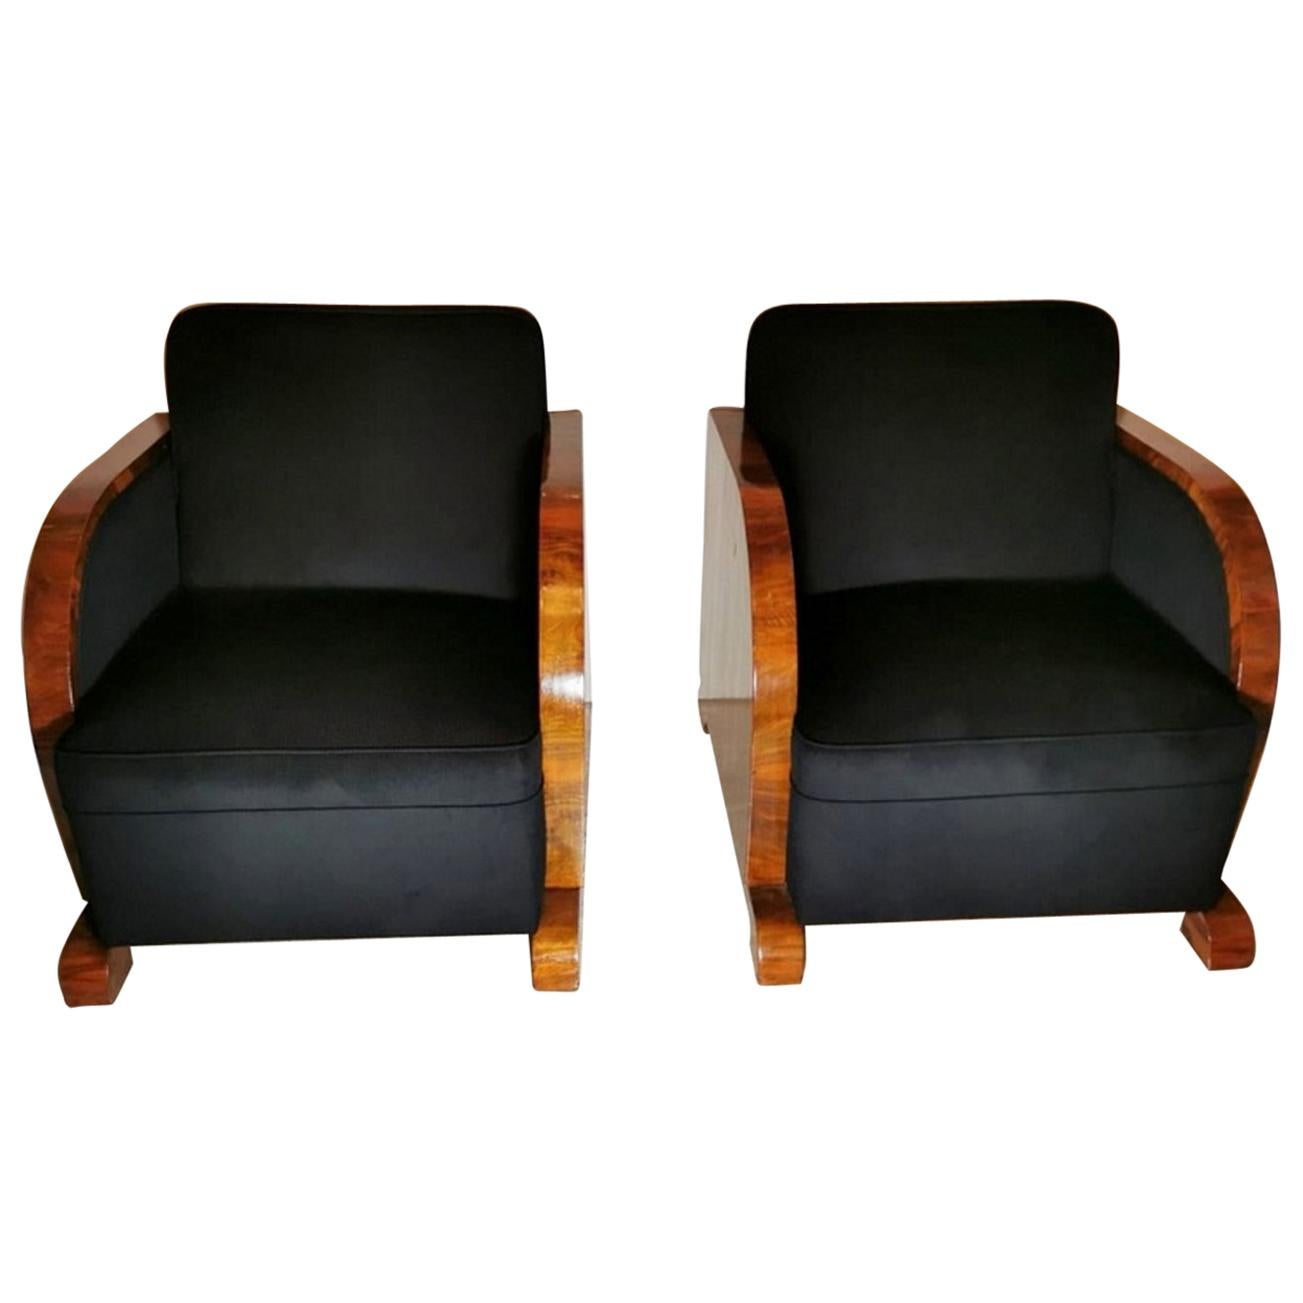 Art Deco Pair of Austrian Armchairs in Walnut and Velvet Worked Black, 1925